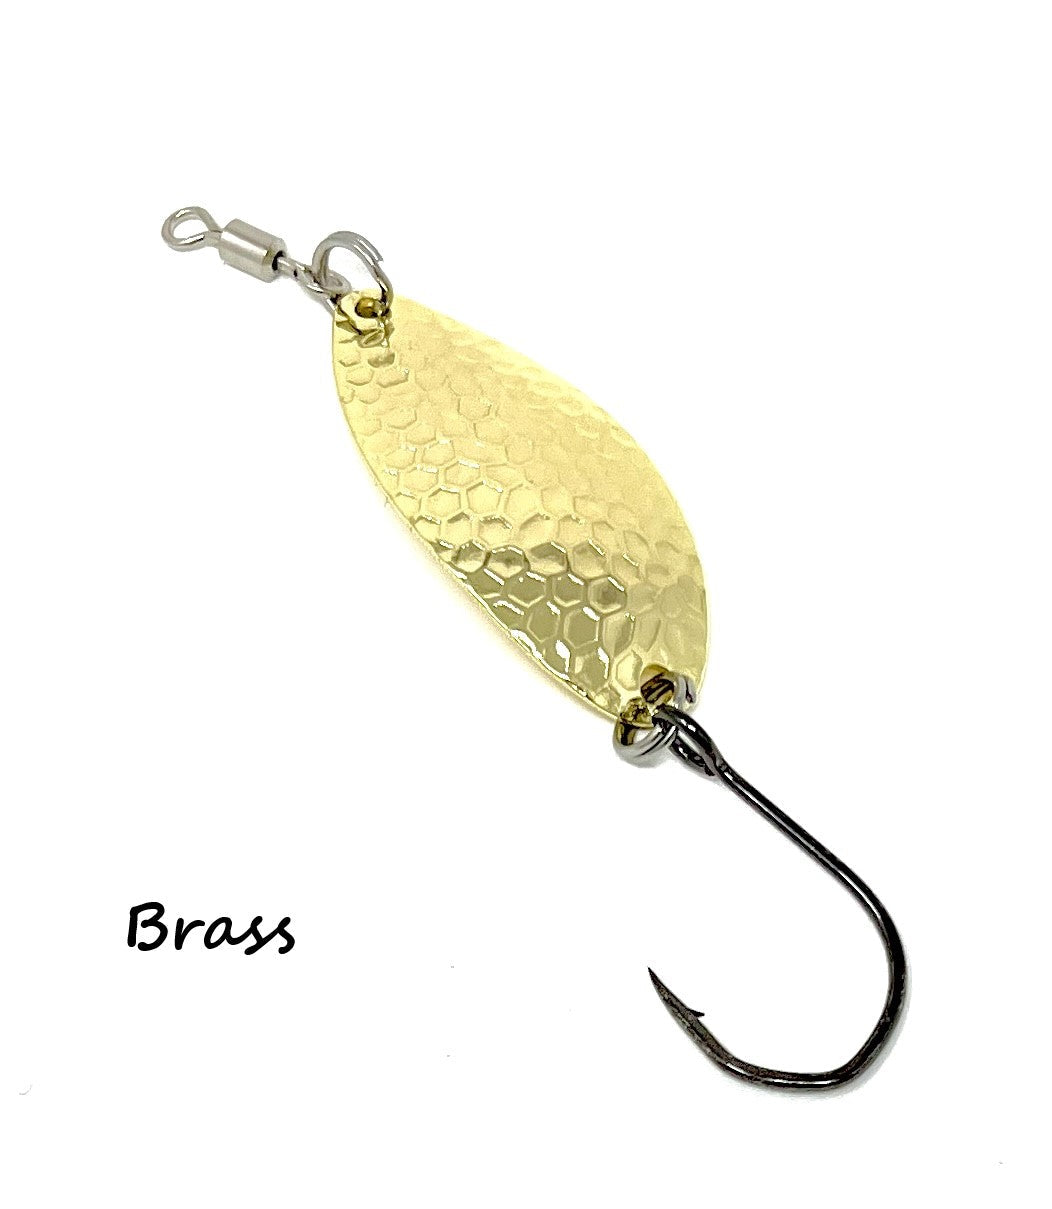 Freshwater Casting Lures